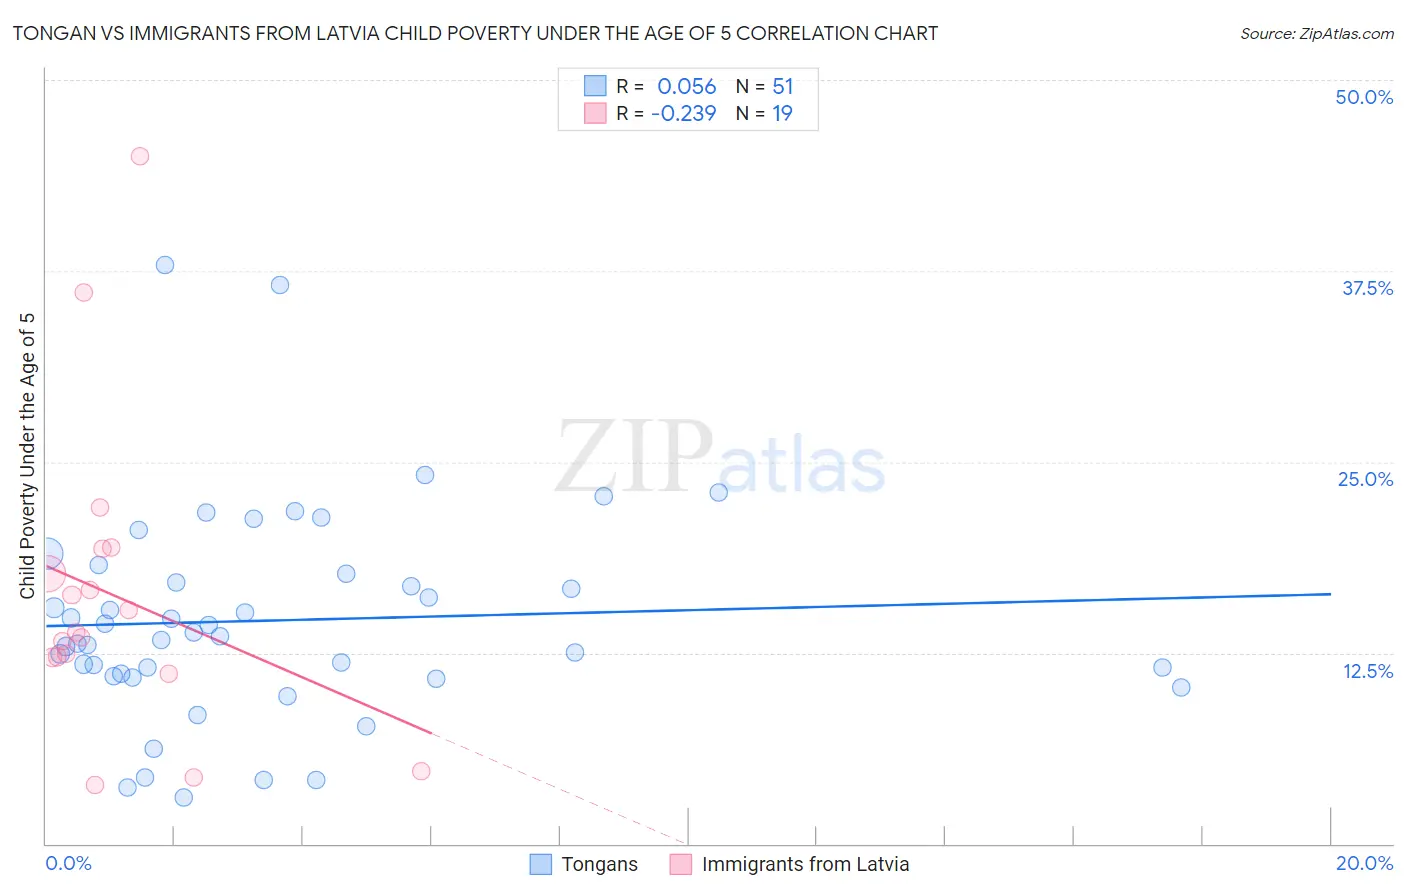 Tongan vs Immigrants from Latvia Child Poverty Under the Age of 5